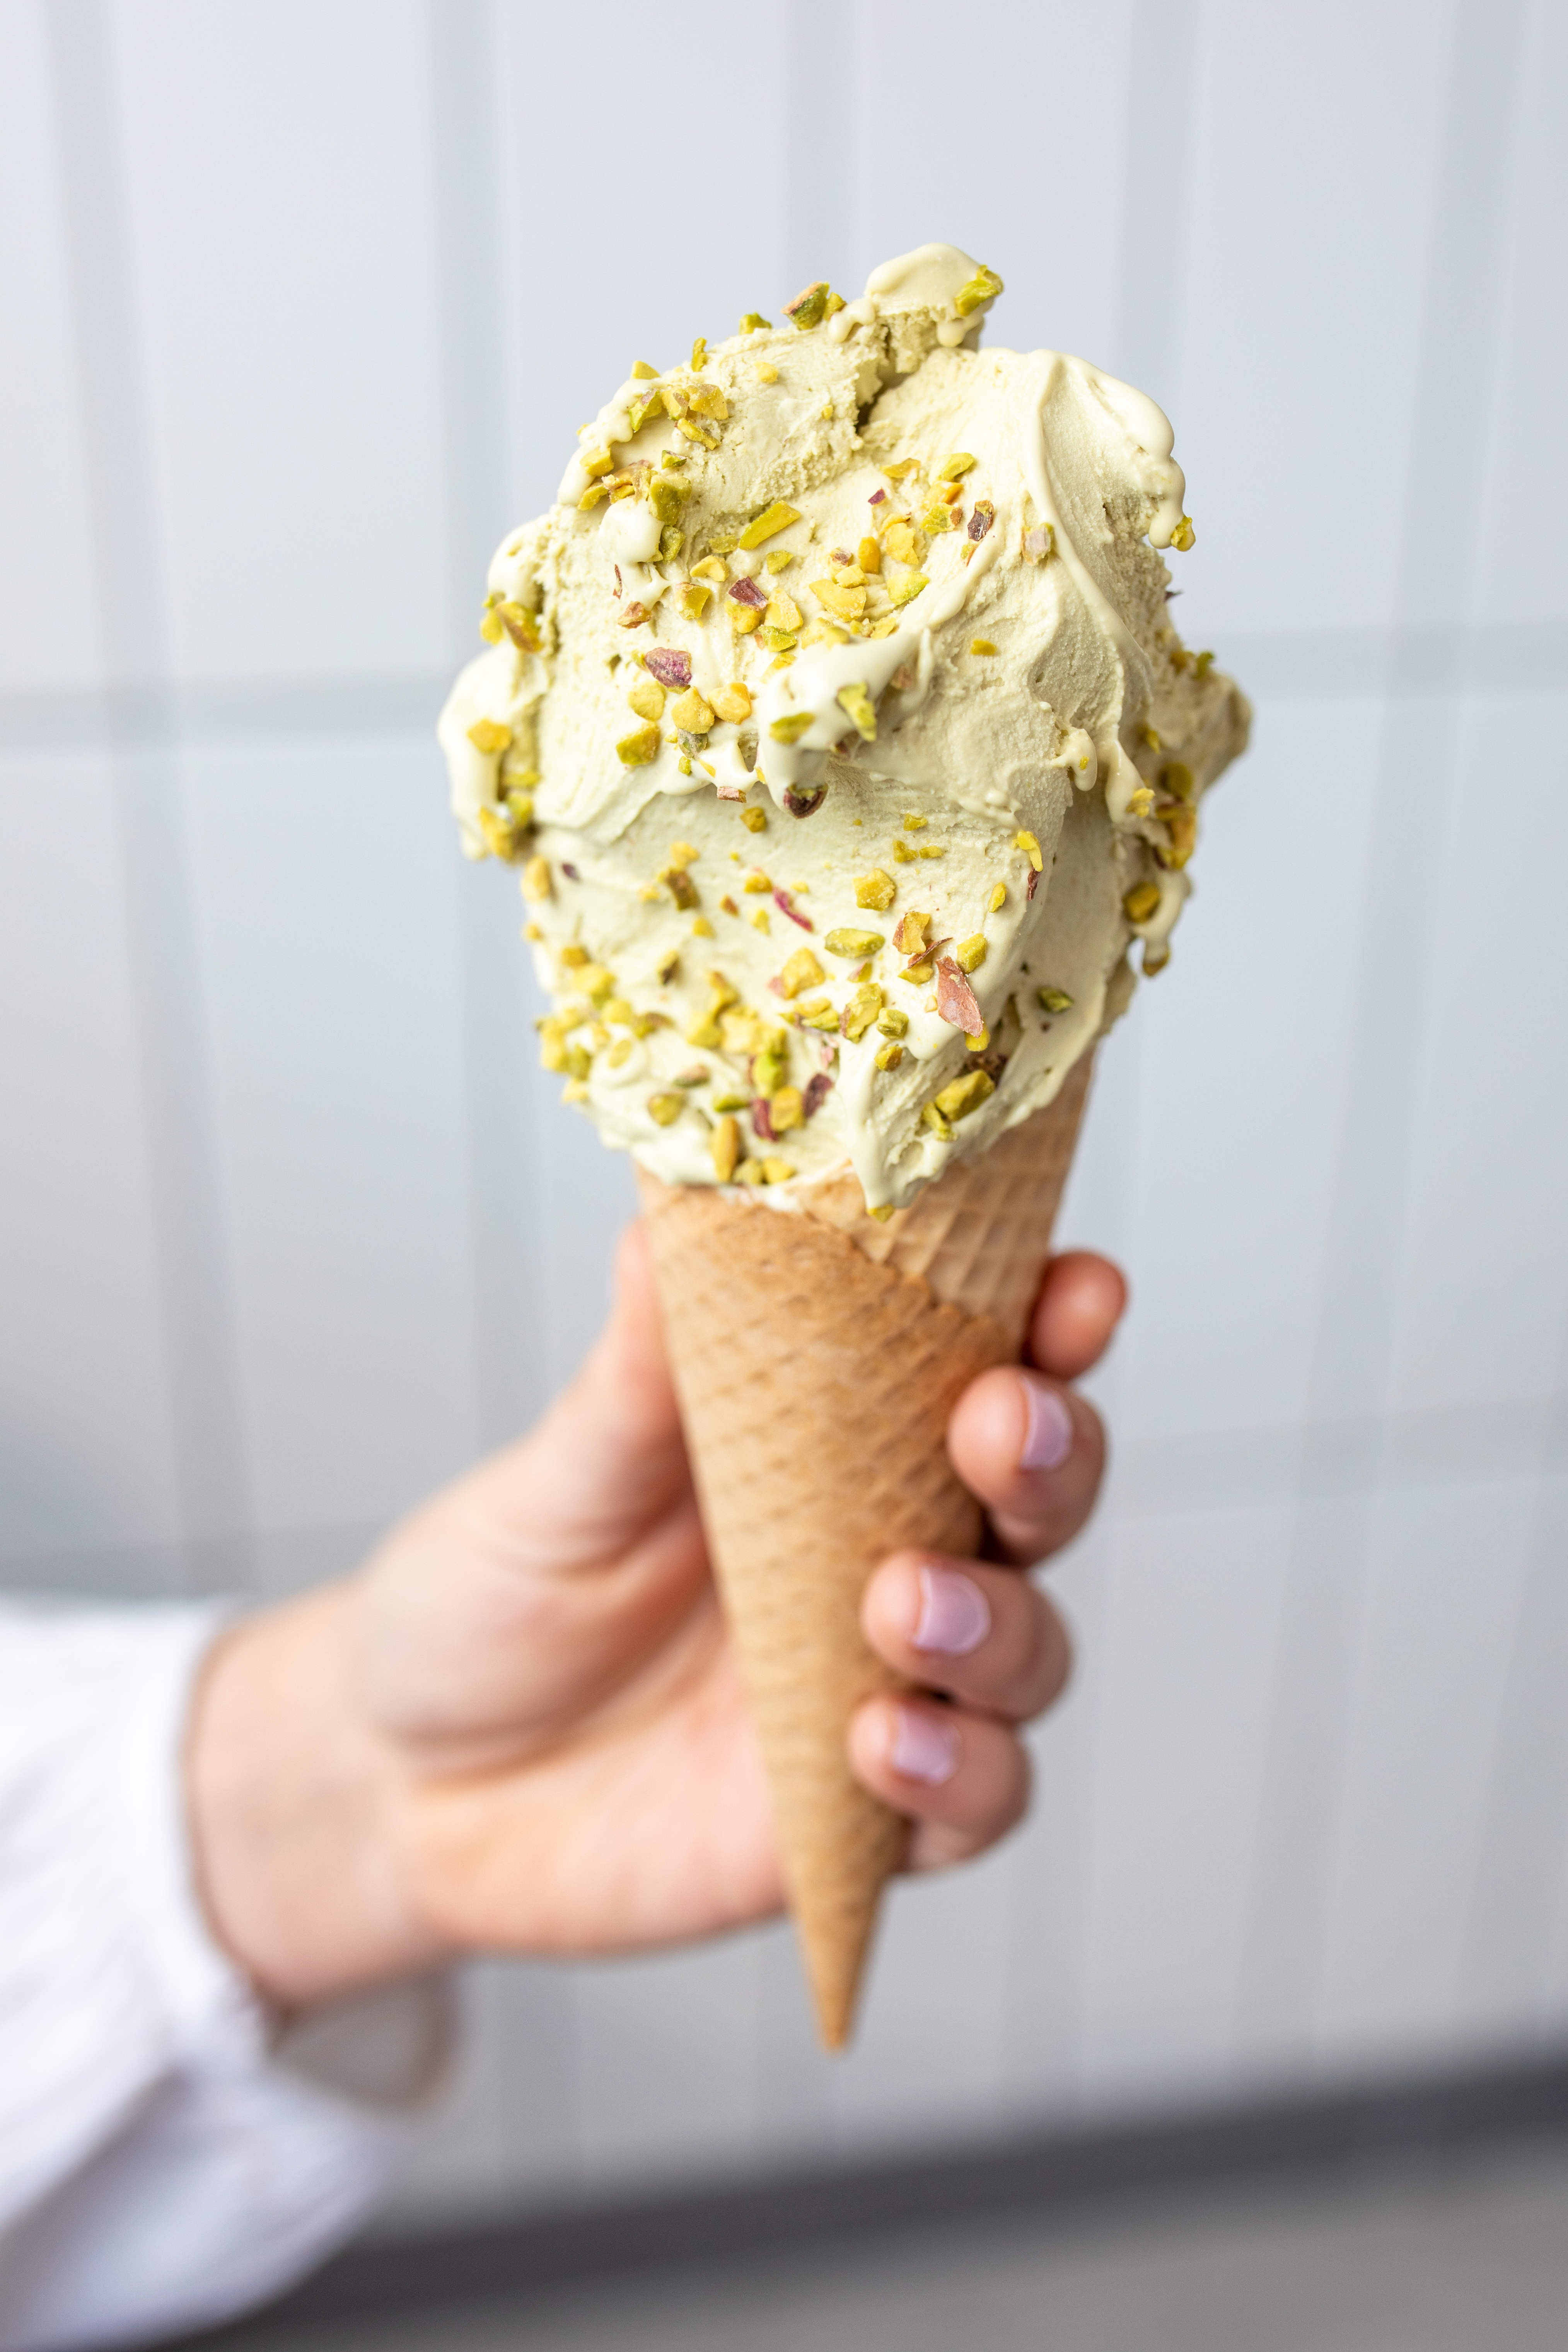 A Ginos Gelato cone with sprinkles on top